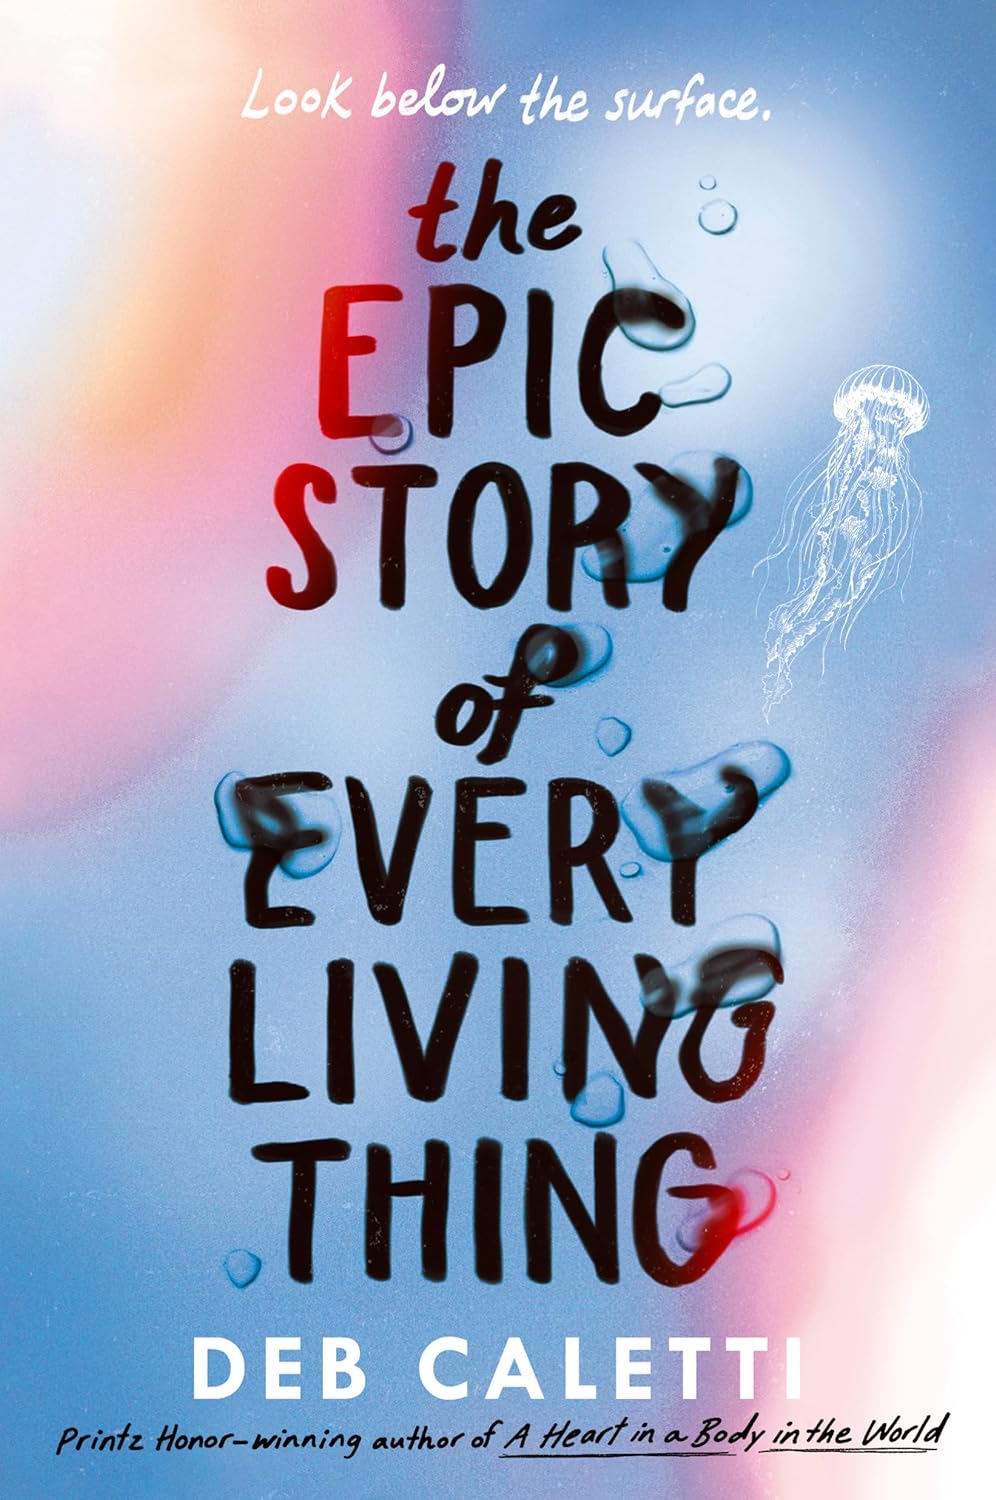 The Epic Story of Every Living Thing - _MS, Deb Caletti, EMBER, LTR-DECJAN2024, YOUNG ADULT